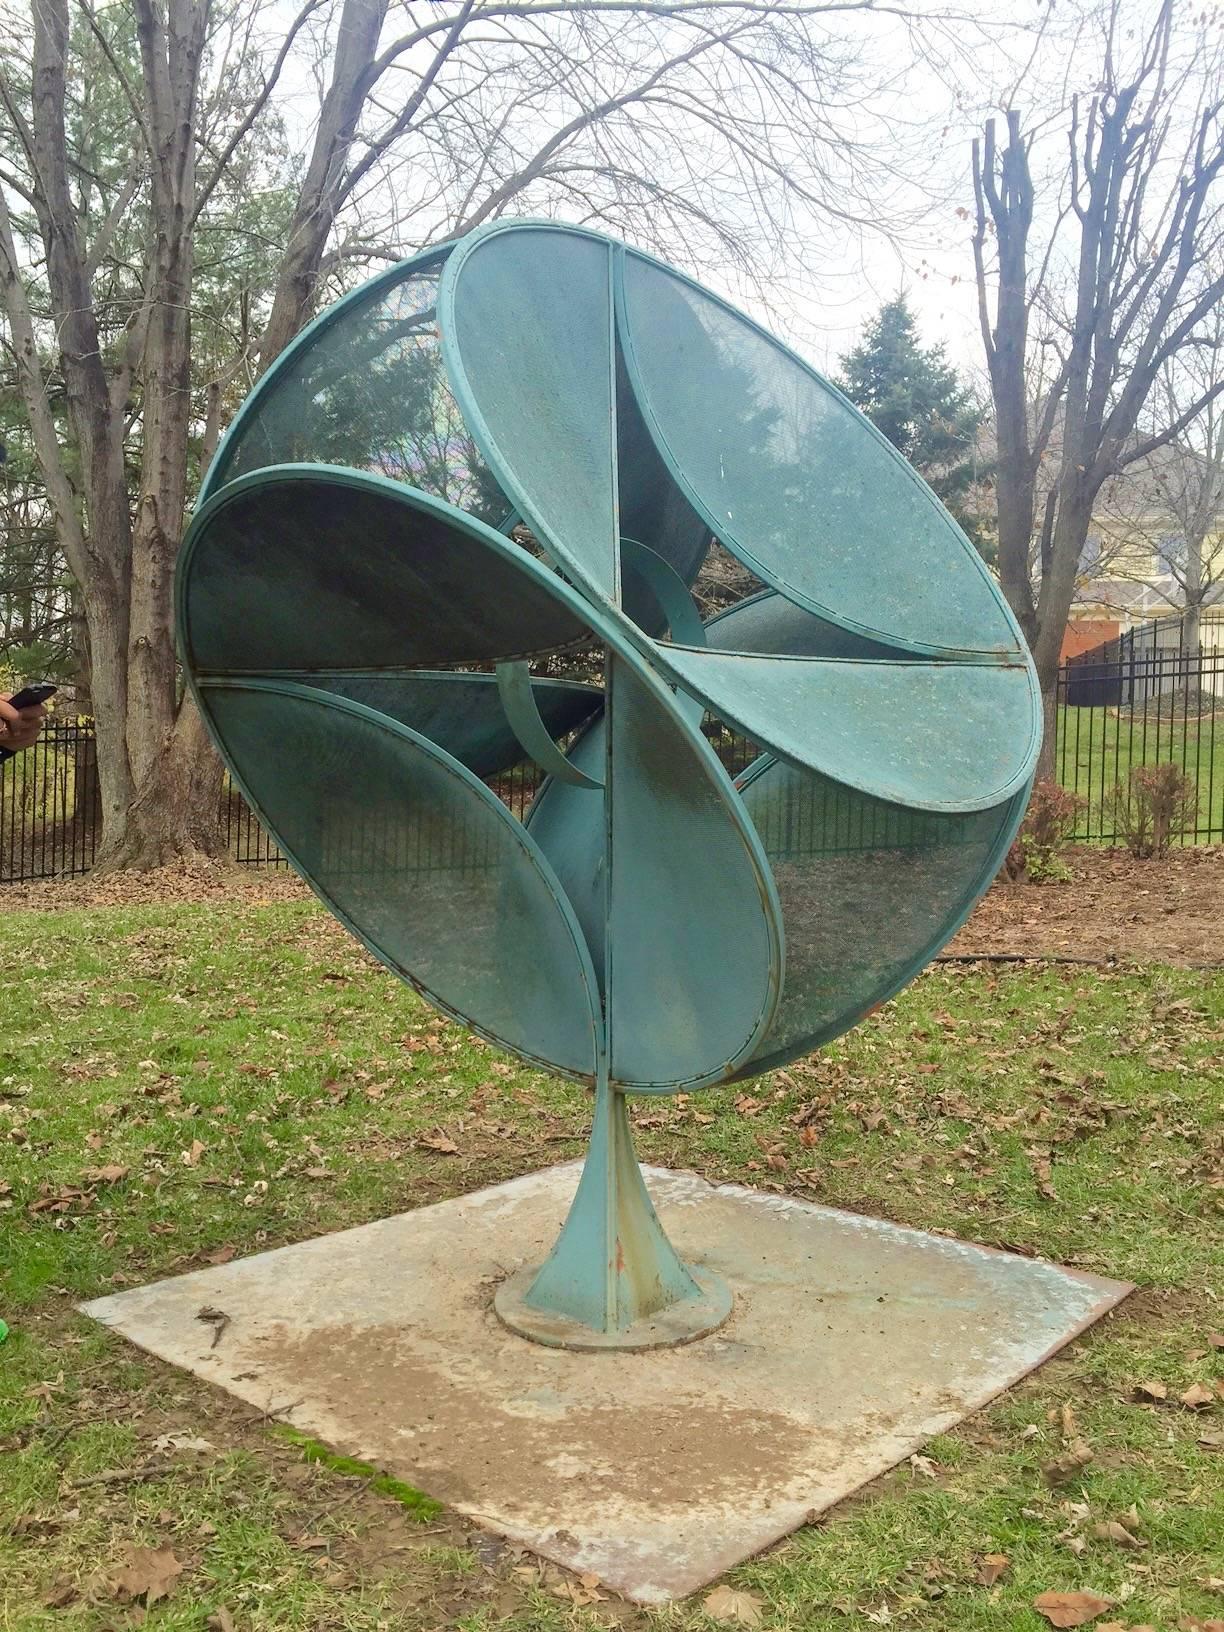 One of a kind outdoor sculpture fountain by St. Louis artist Saunders Schultz. Made of copper metal.

Pedestal 18